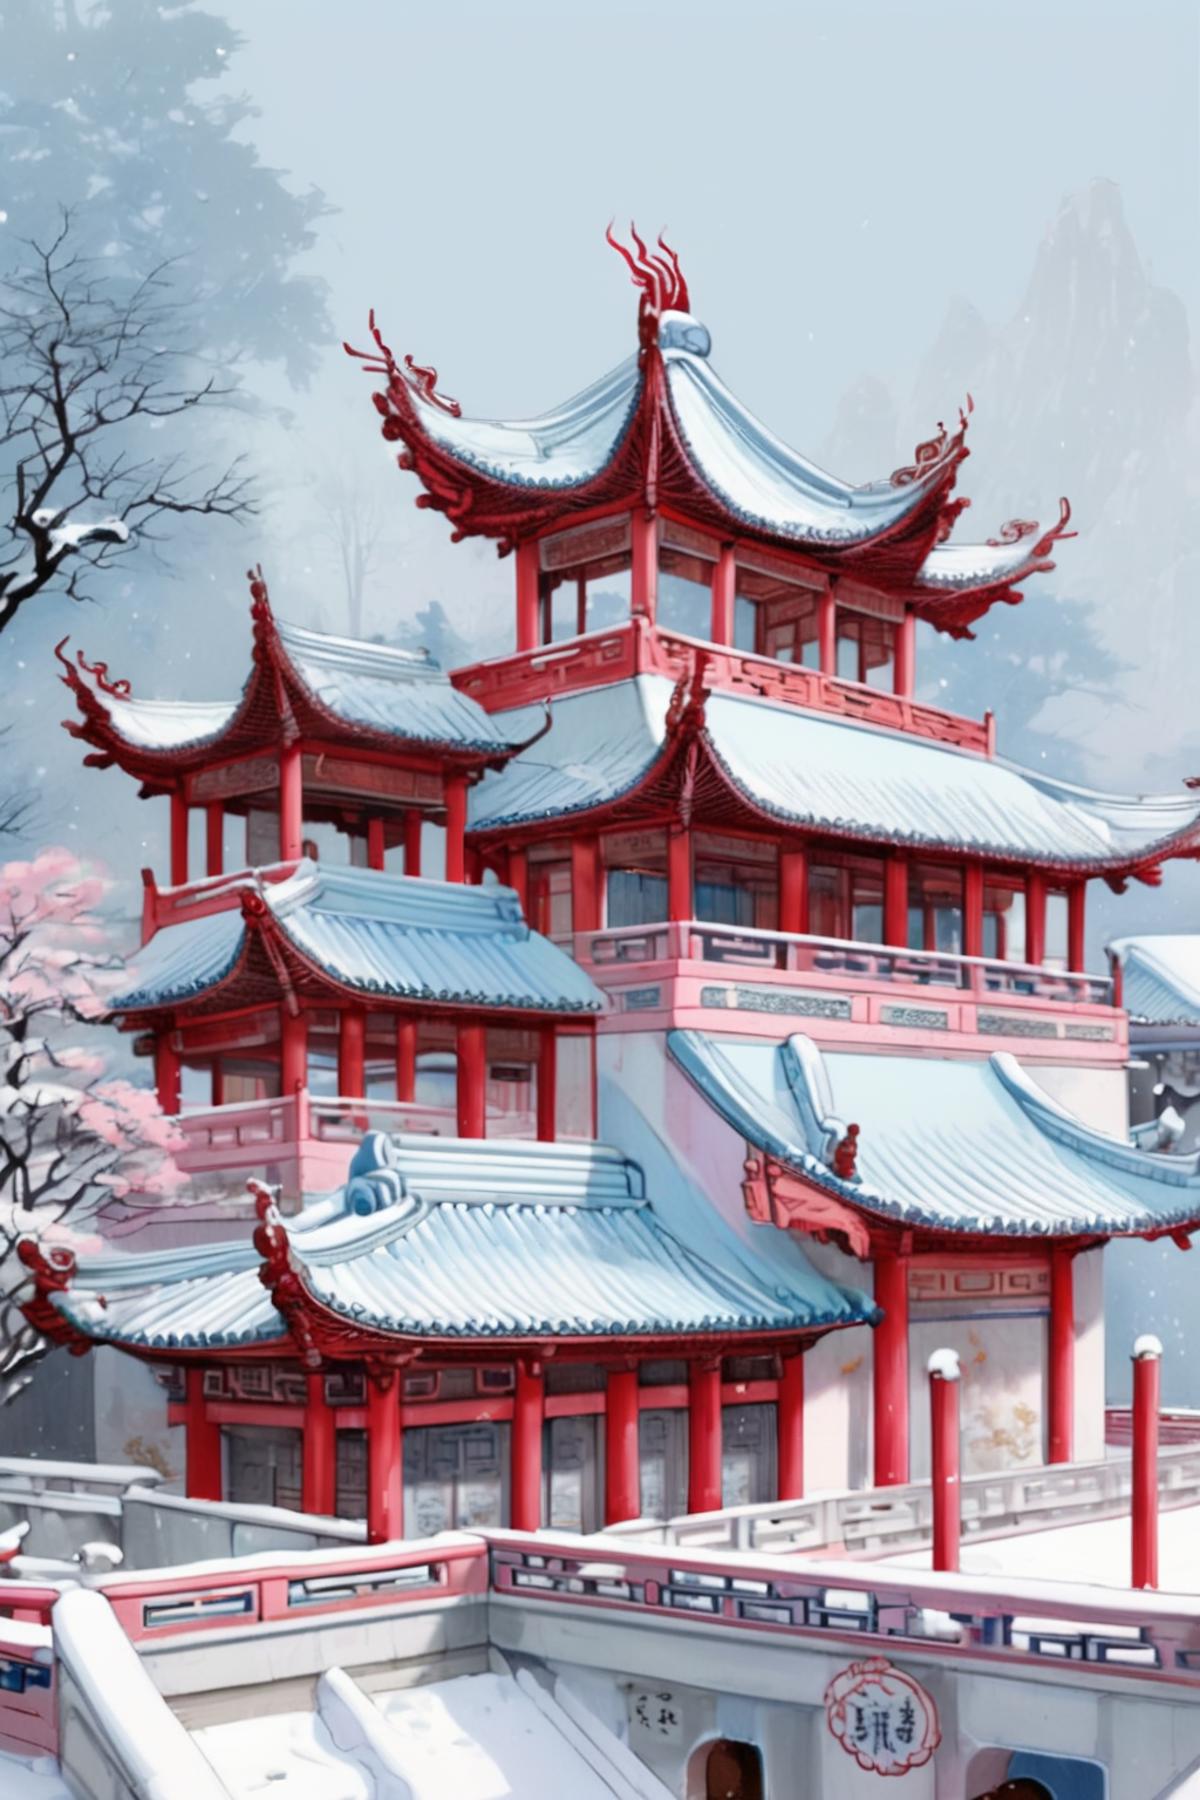 Chinese Traditional Architecture image by CyberBlacat